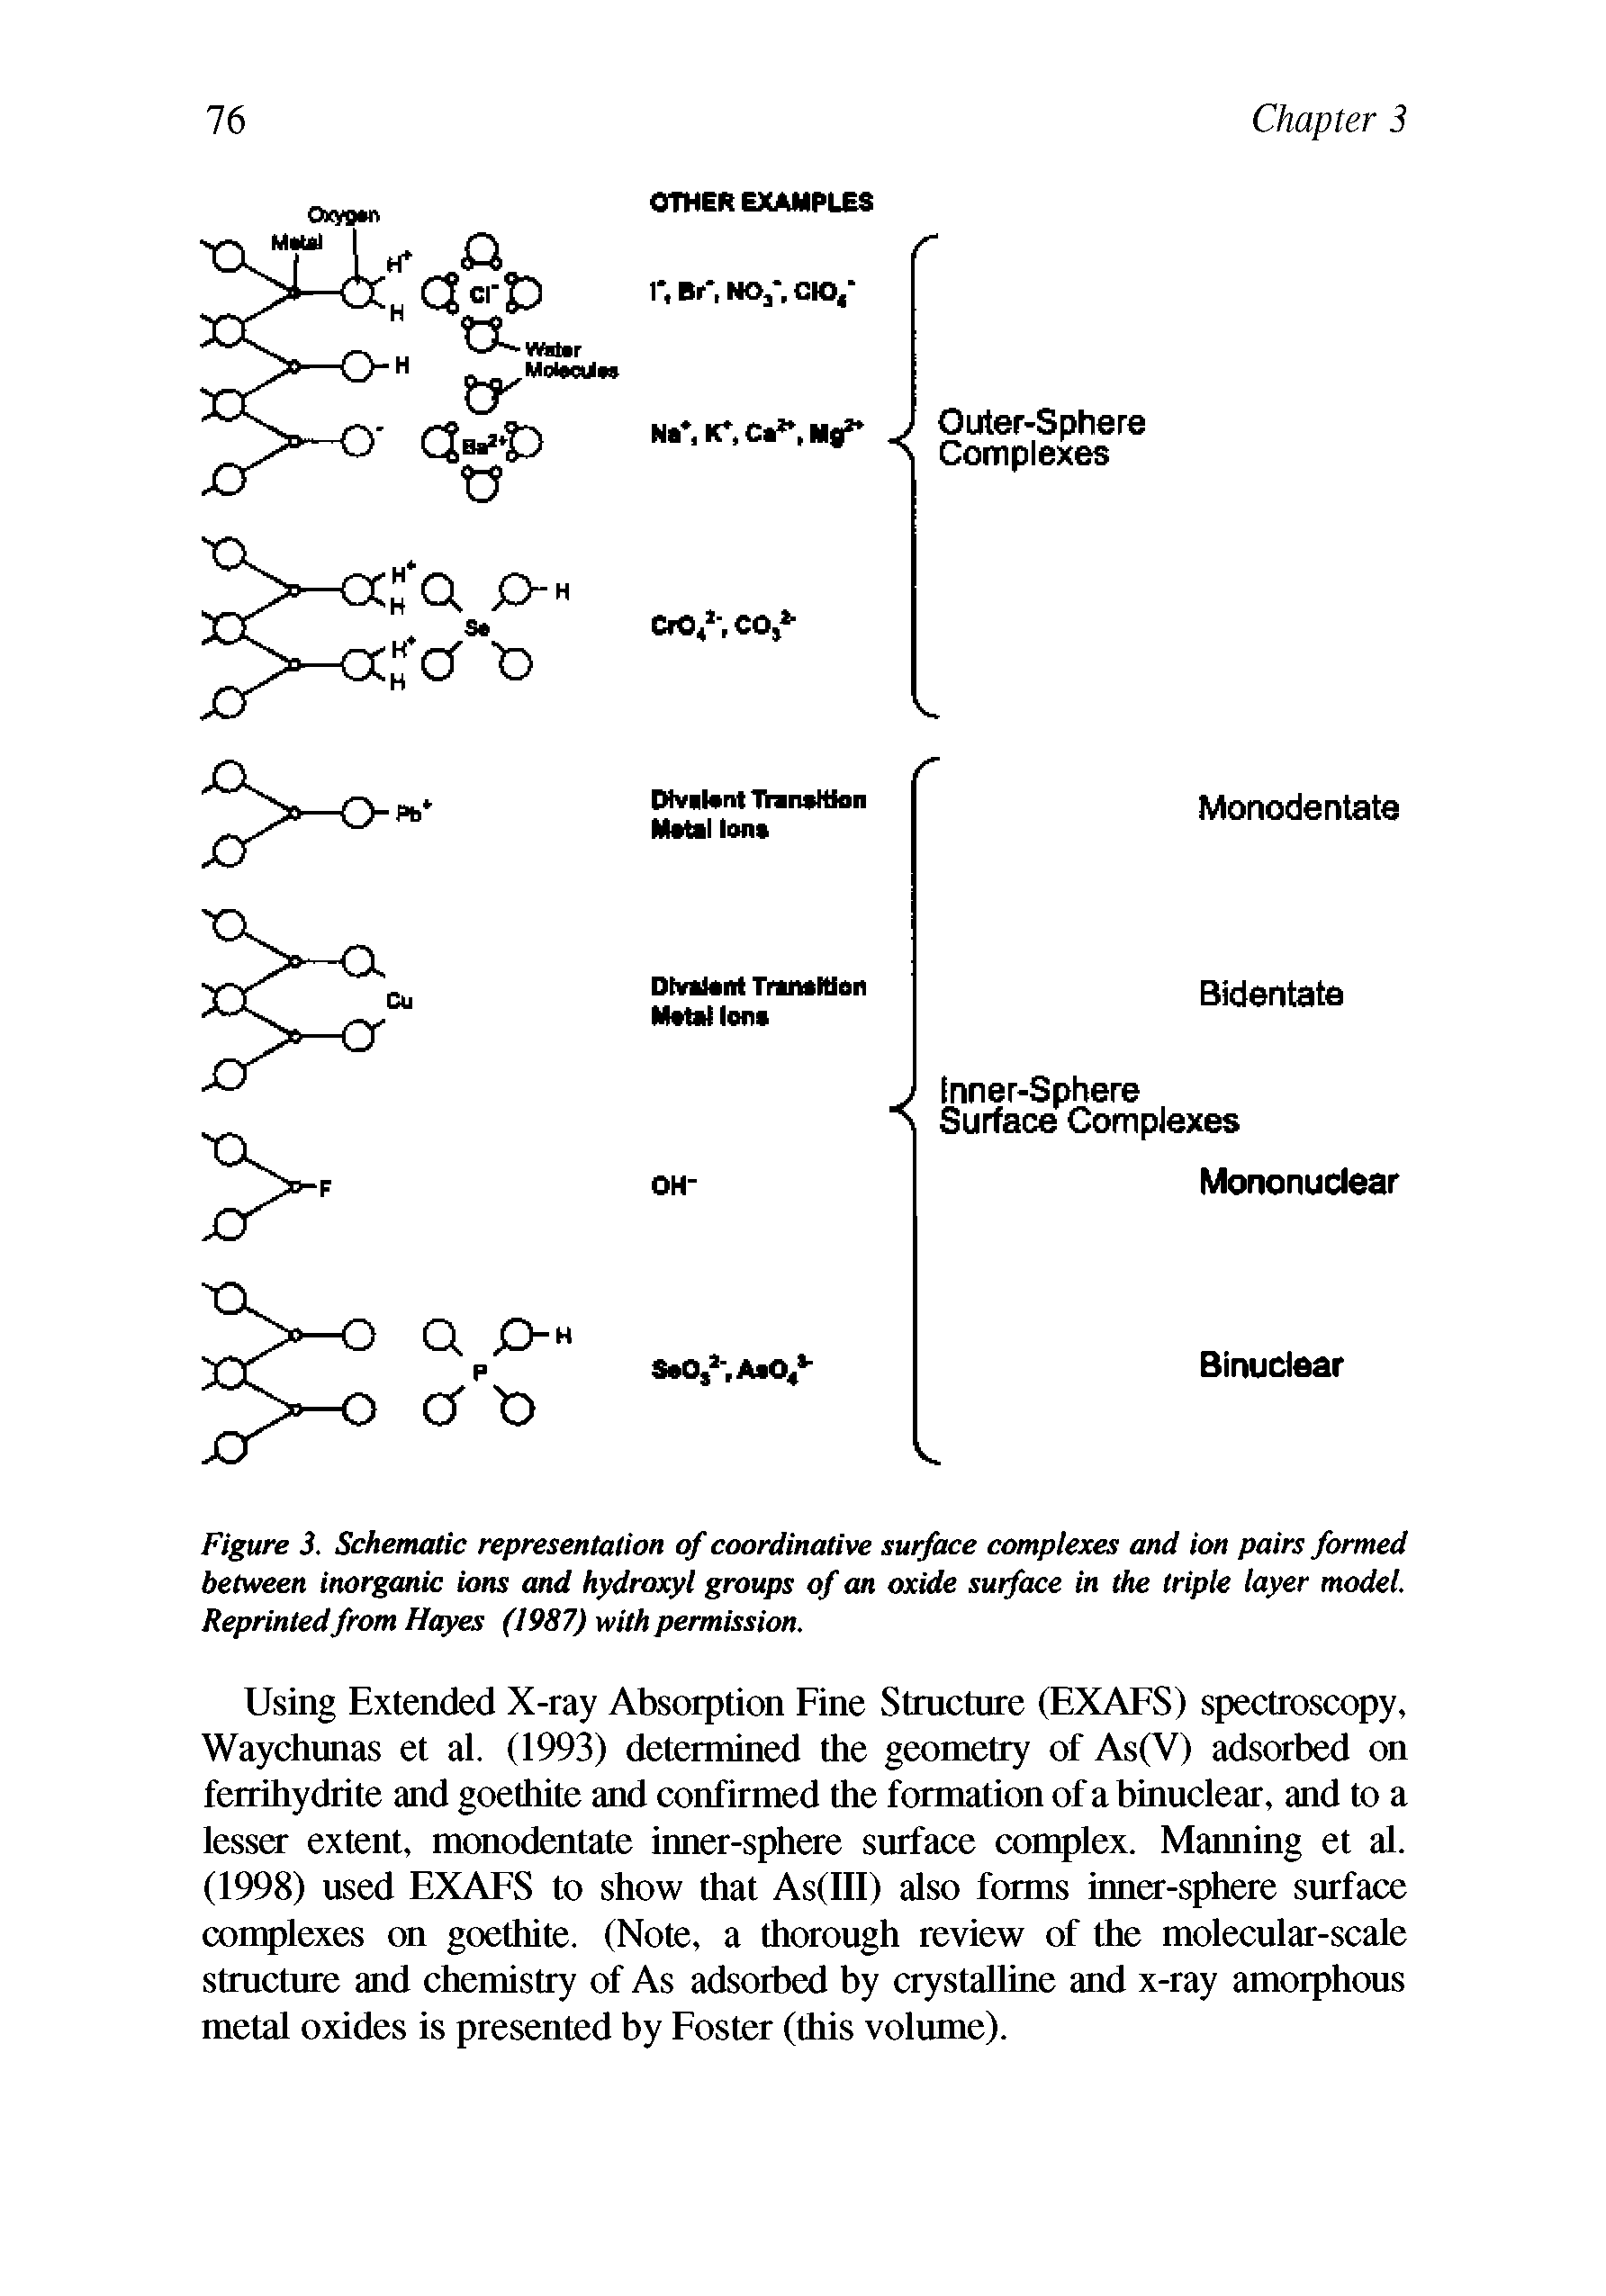 Figure 3. Schematic representation of coordinative surface complexes and ion pairs formed between inorganic ions and hydroxyl groups of an oxide surface in the triple layer model. Reprinted from Hayes (1987) with permission.